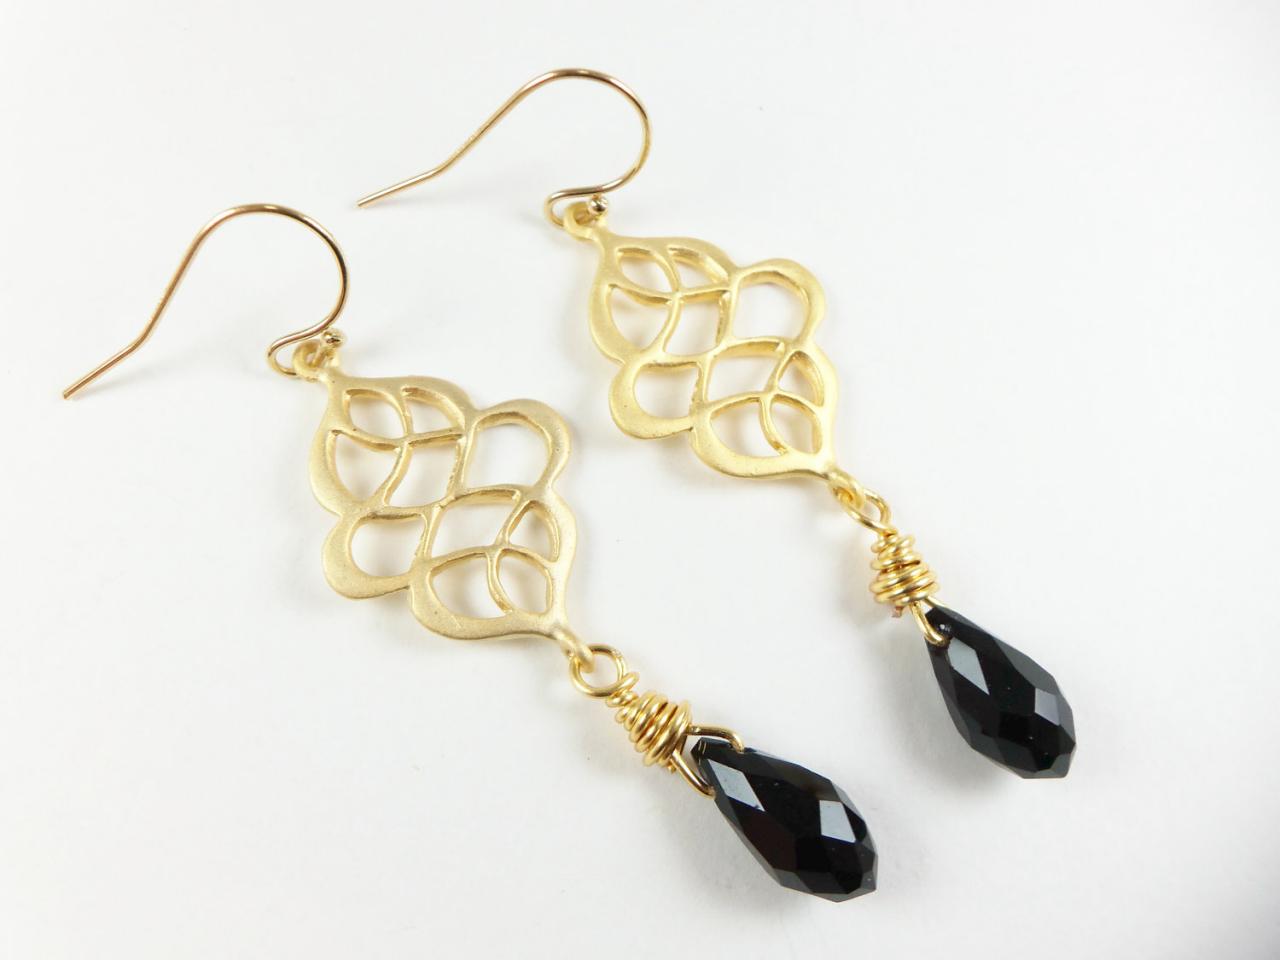 Black And Gold Earrings Black Jewelry Crystal Earrings Gold Jewelry Dangle Earrings Swarovski